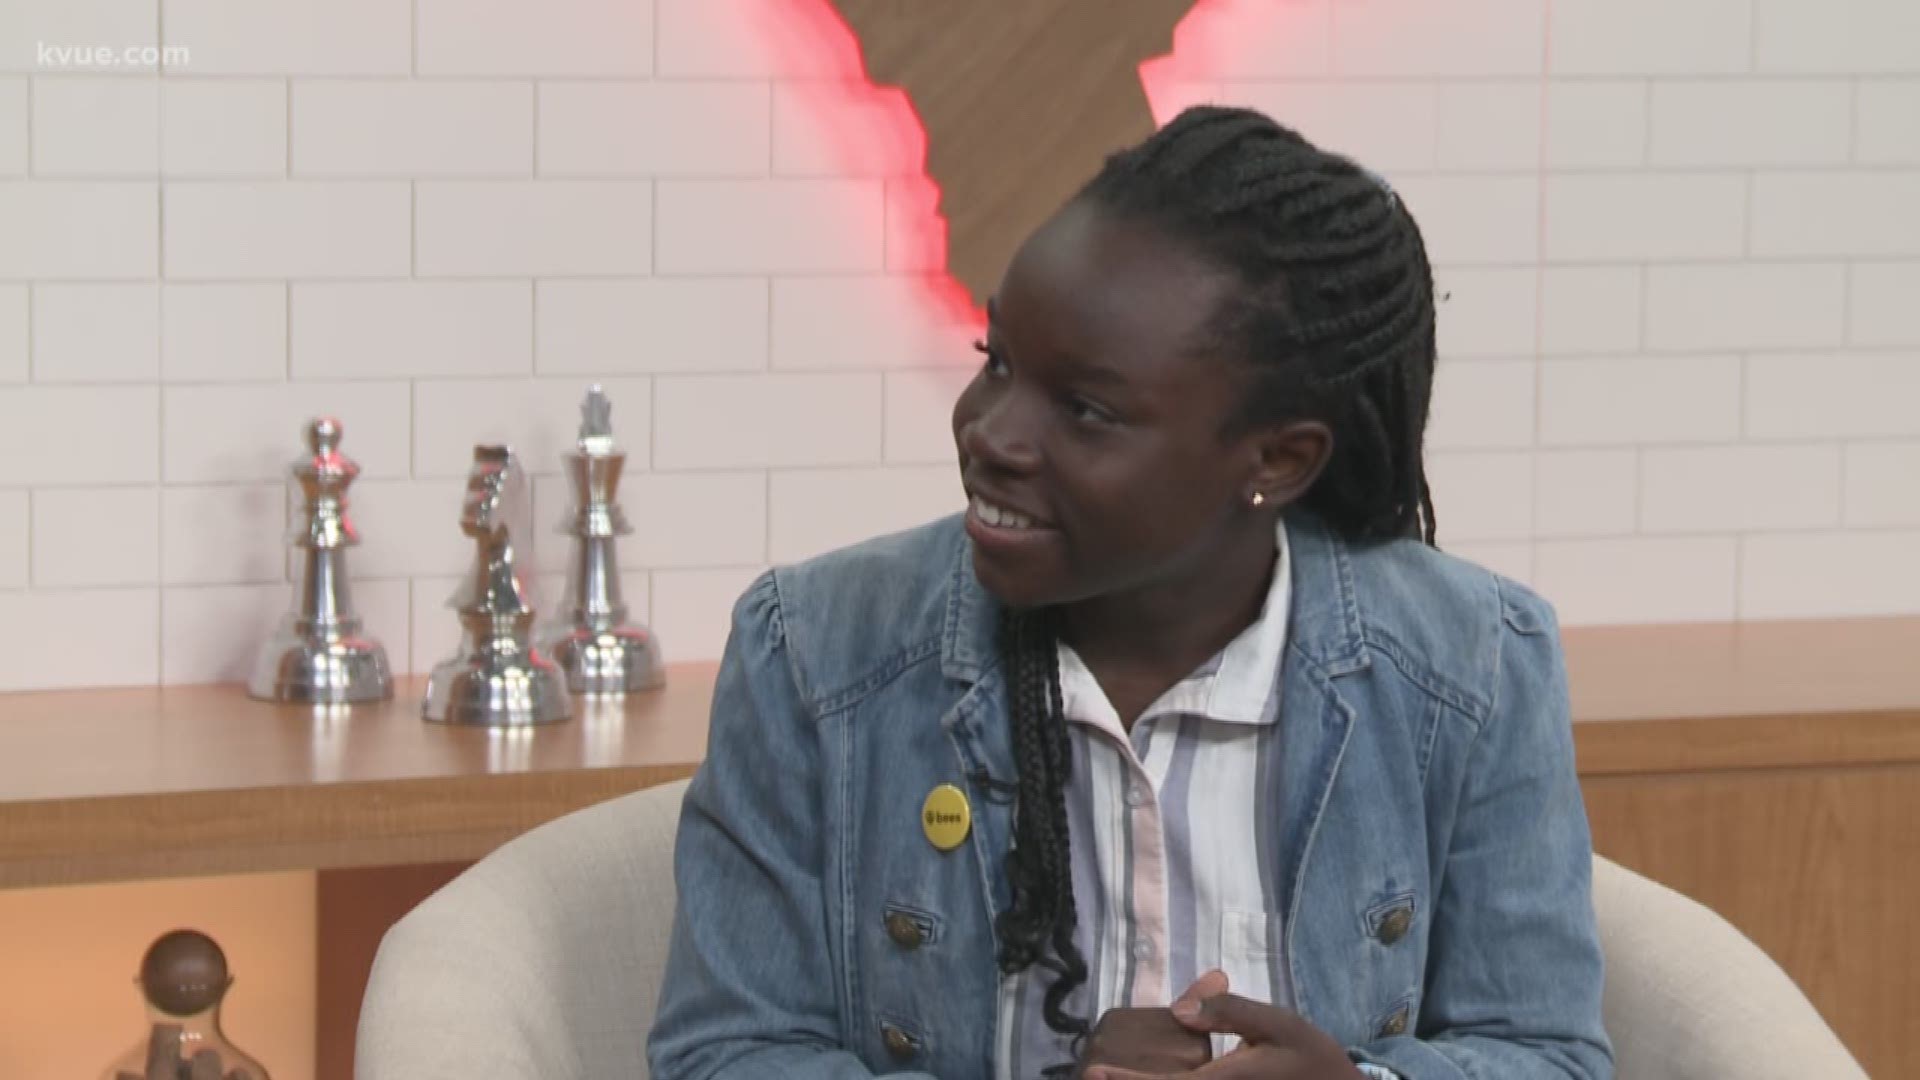 It's time for Made in Austin where we feature locally-grown companies. Joining KVUE is 15-year-old Mikaila Ulmer, founder of all-natural lemonade "Me & the Bees."